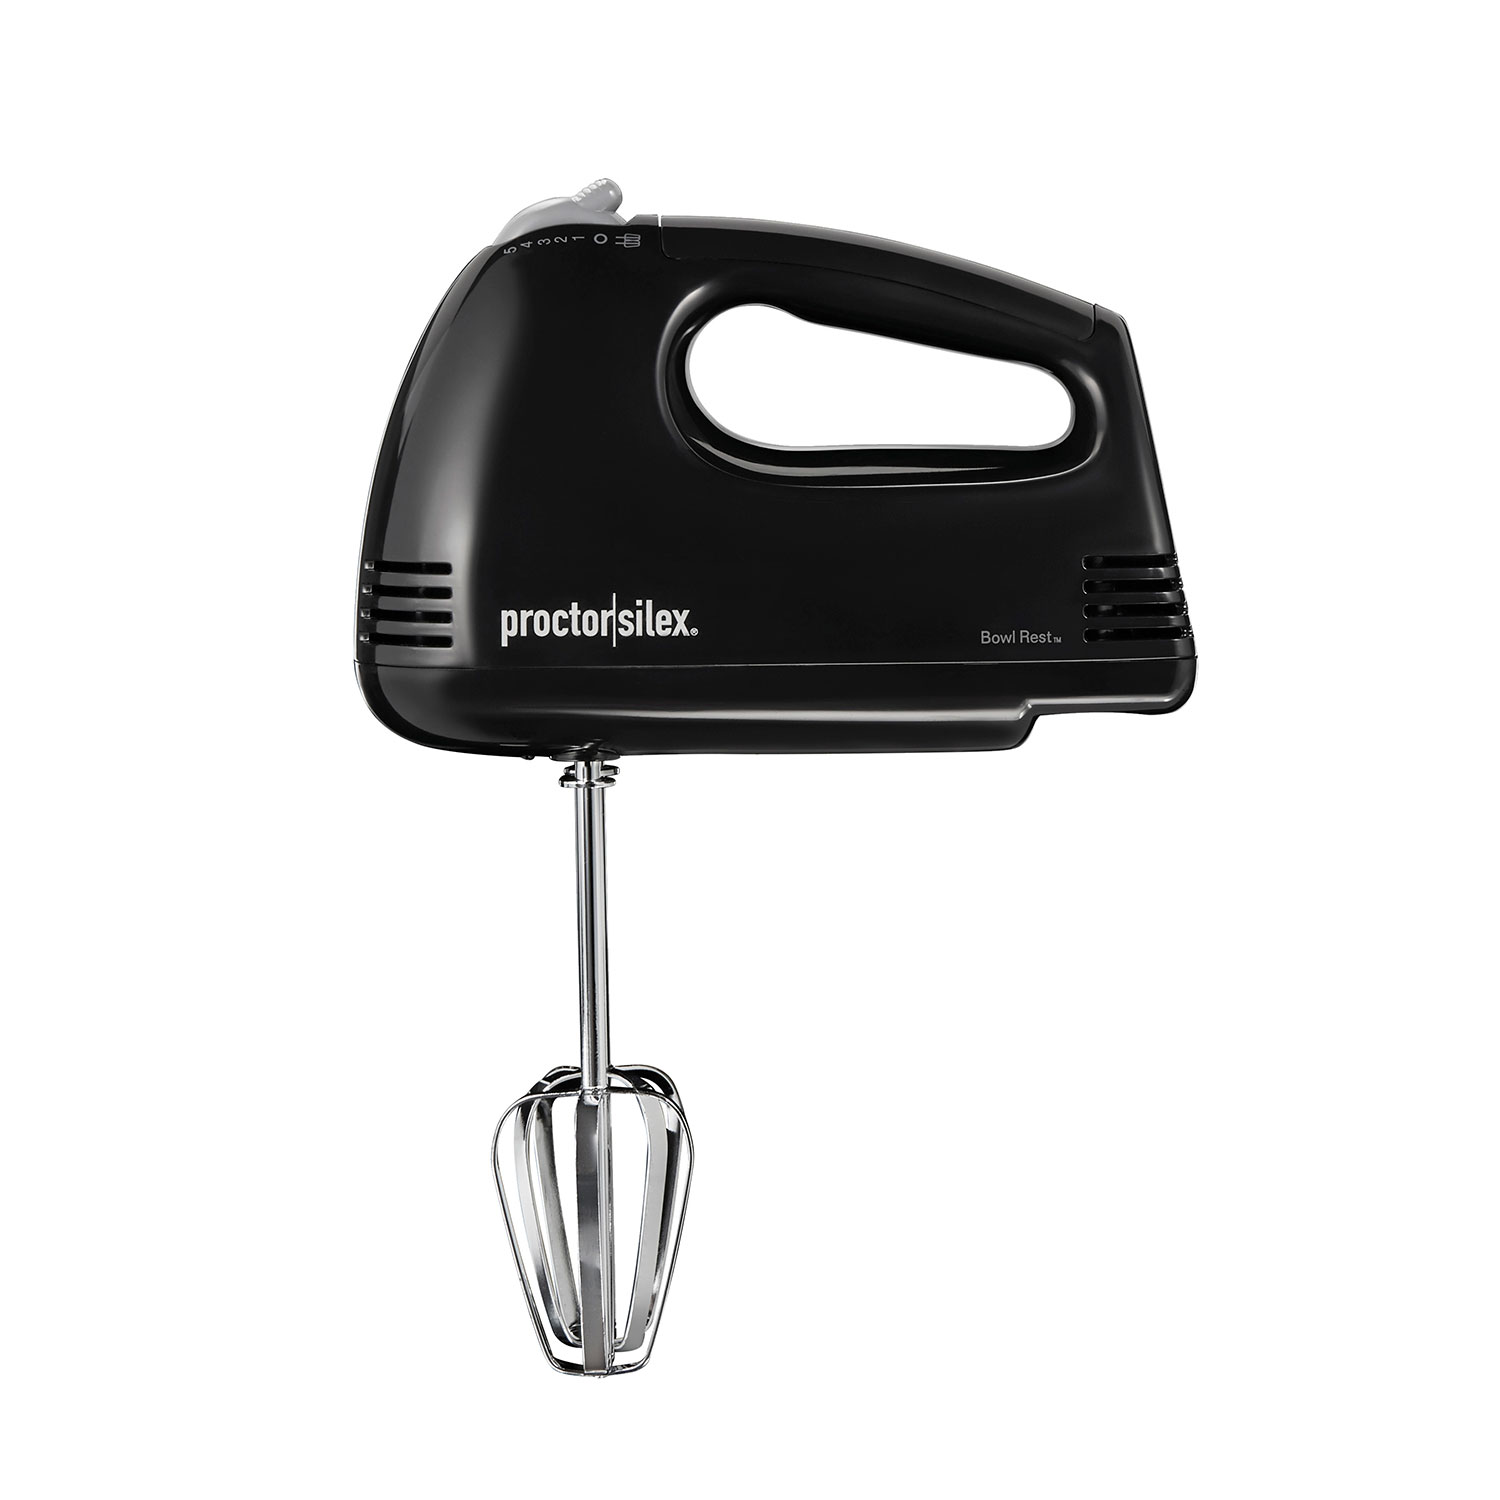 Easy Mix Hand Mixer 5 Speeds (black) - 62507PS Small Size